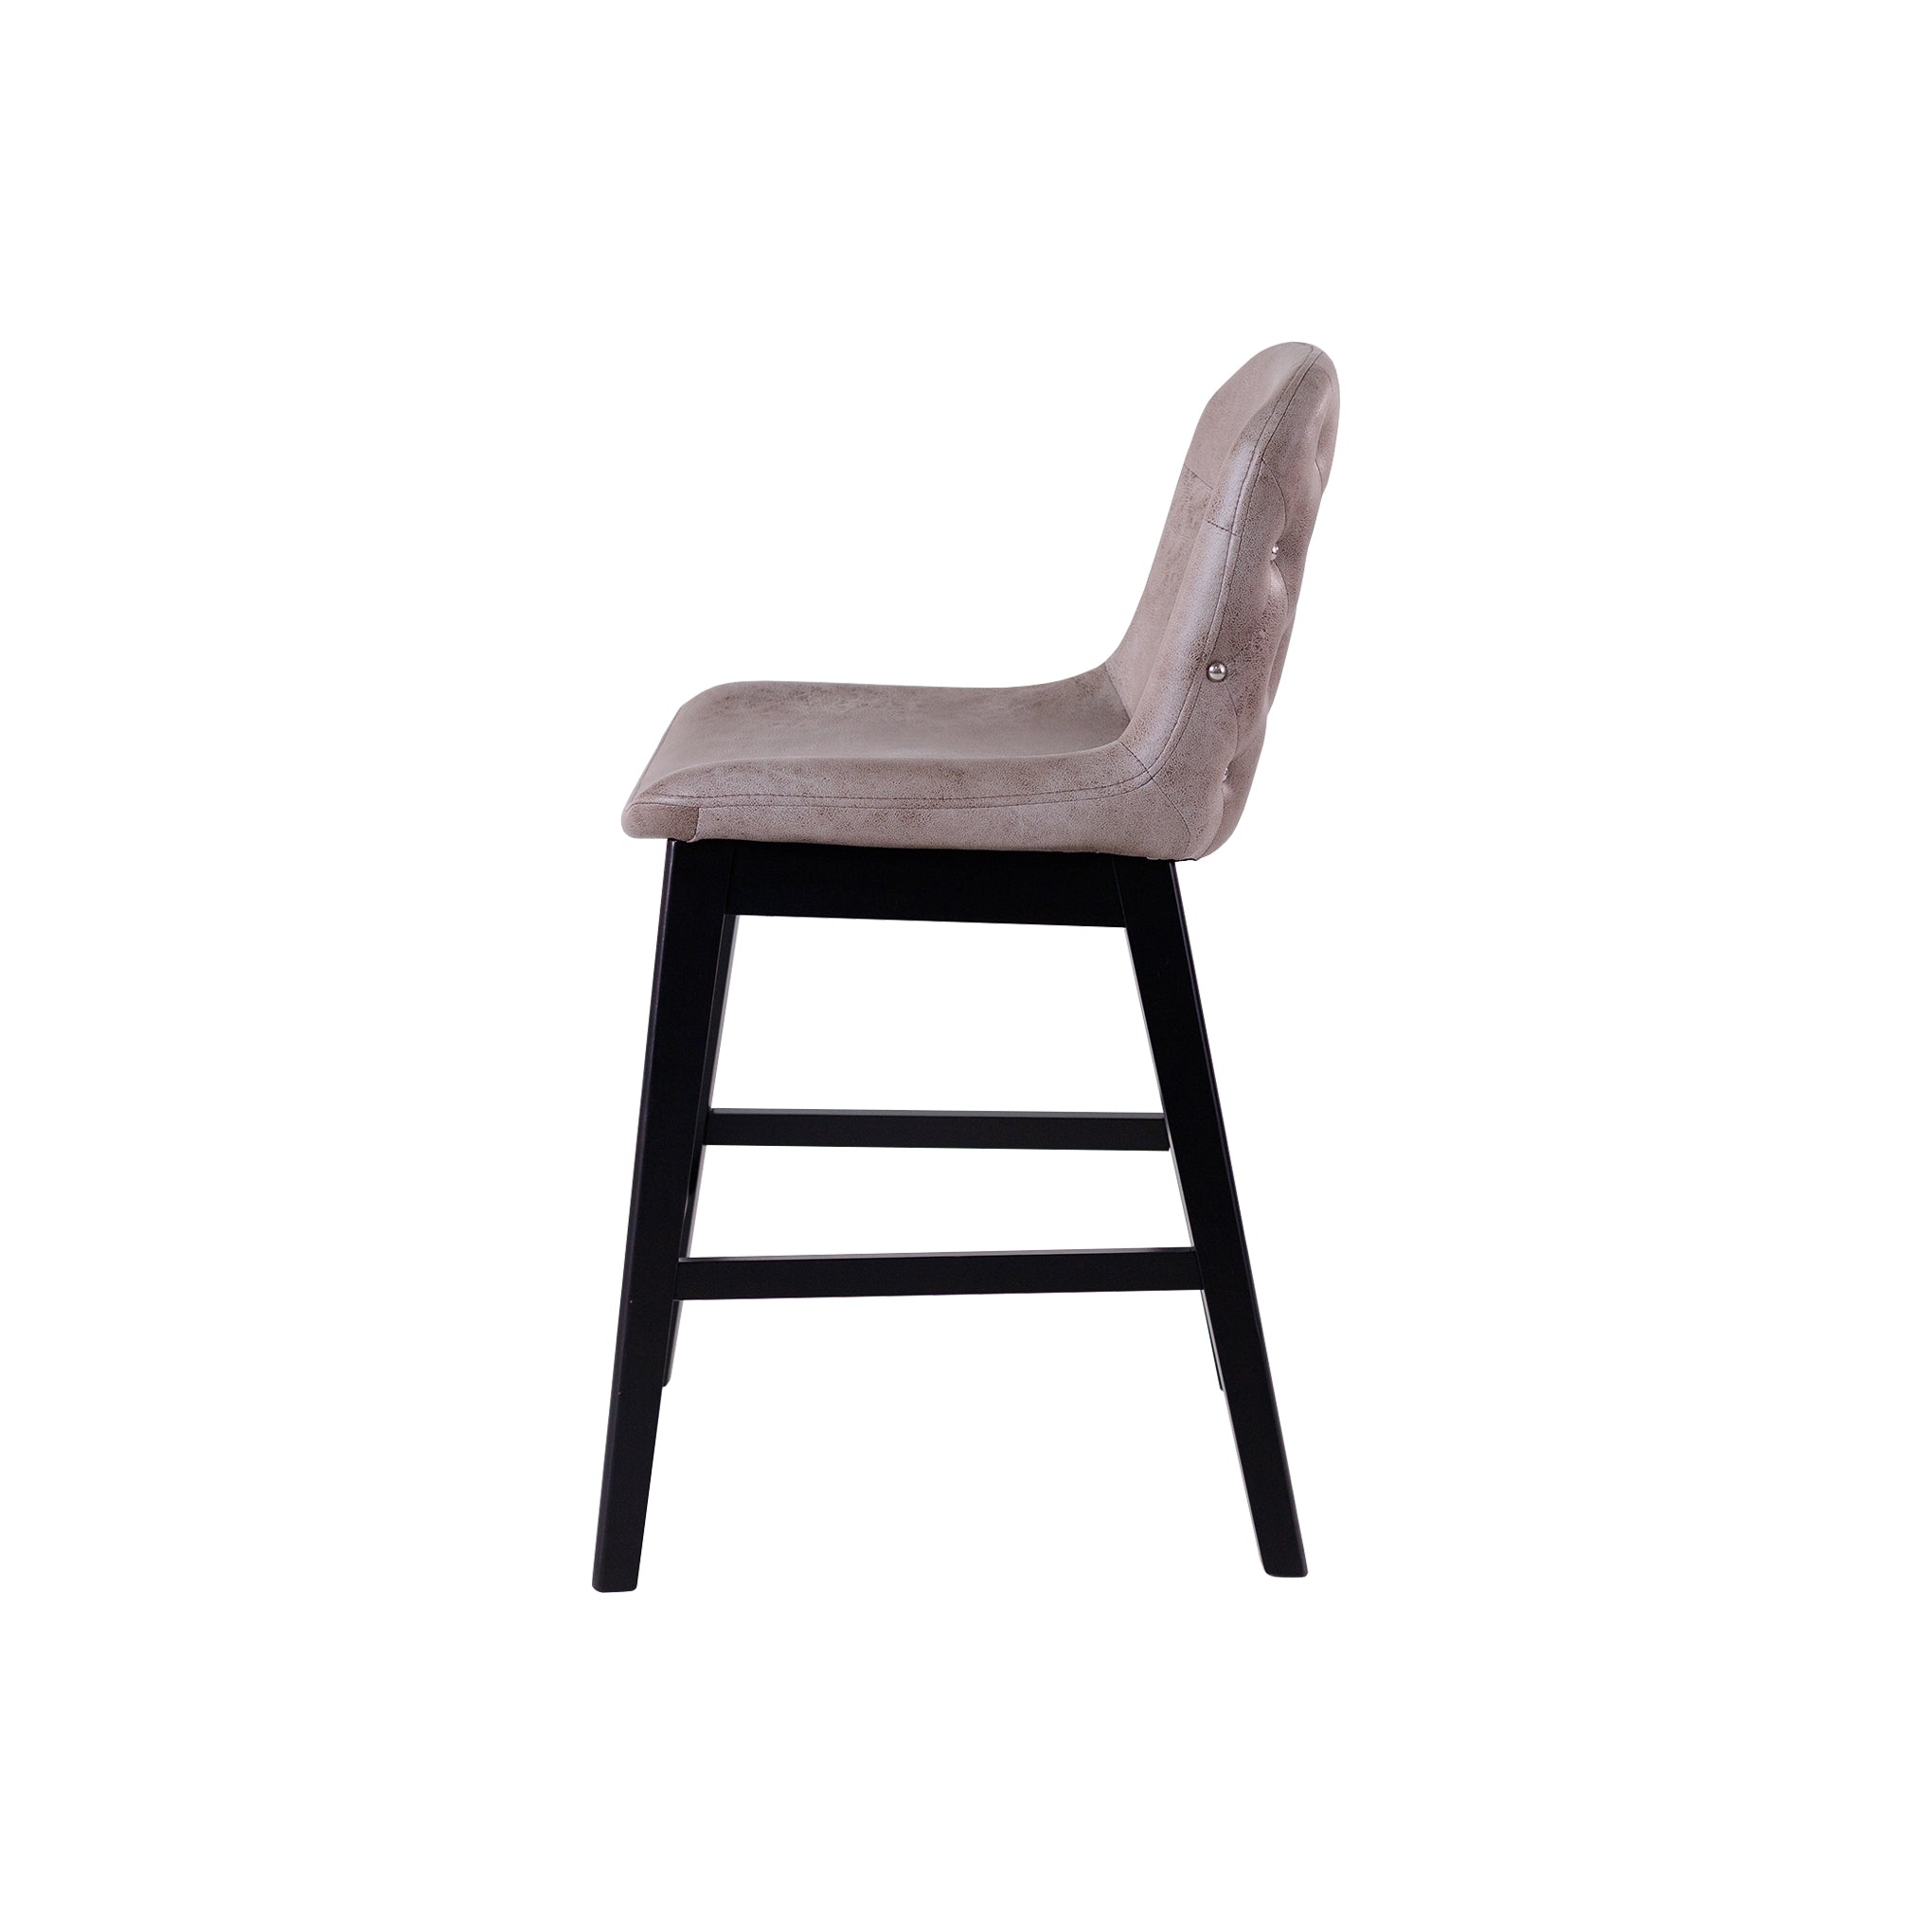 <b> Butonic Counter Height Dining Chair </b><br>W490 X D540 X H940MM SEAT HEIGHT : 640MM